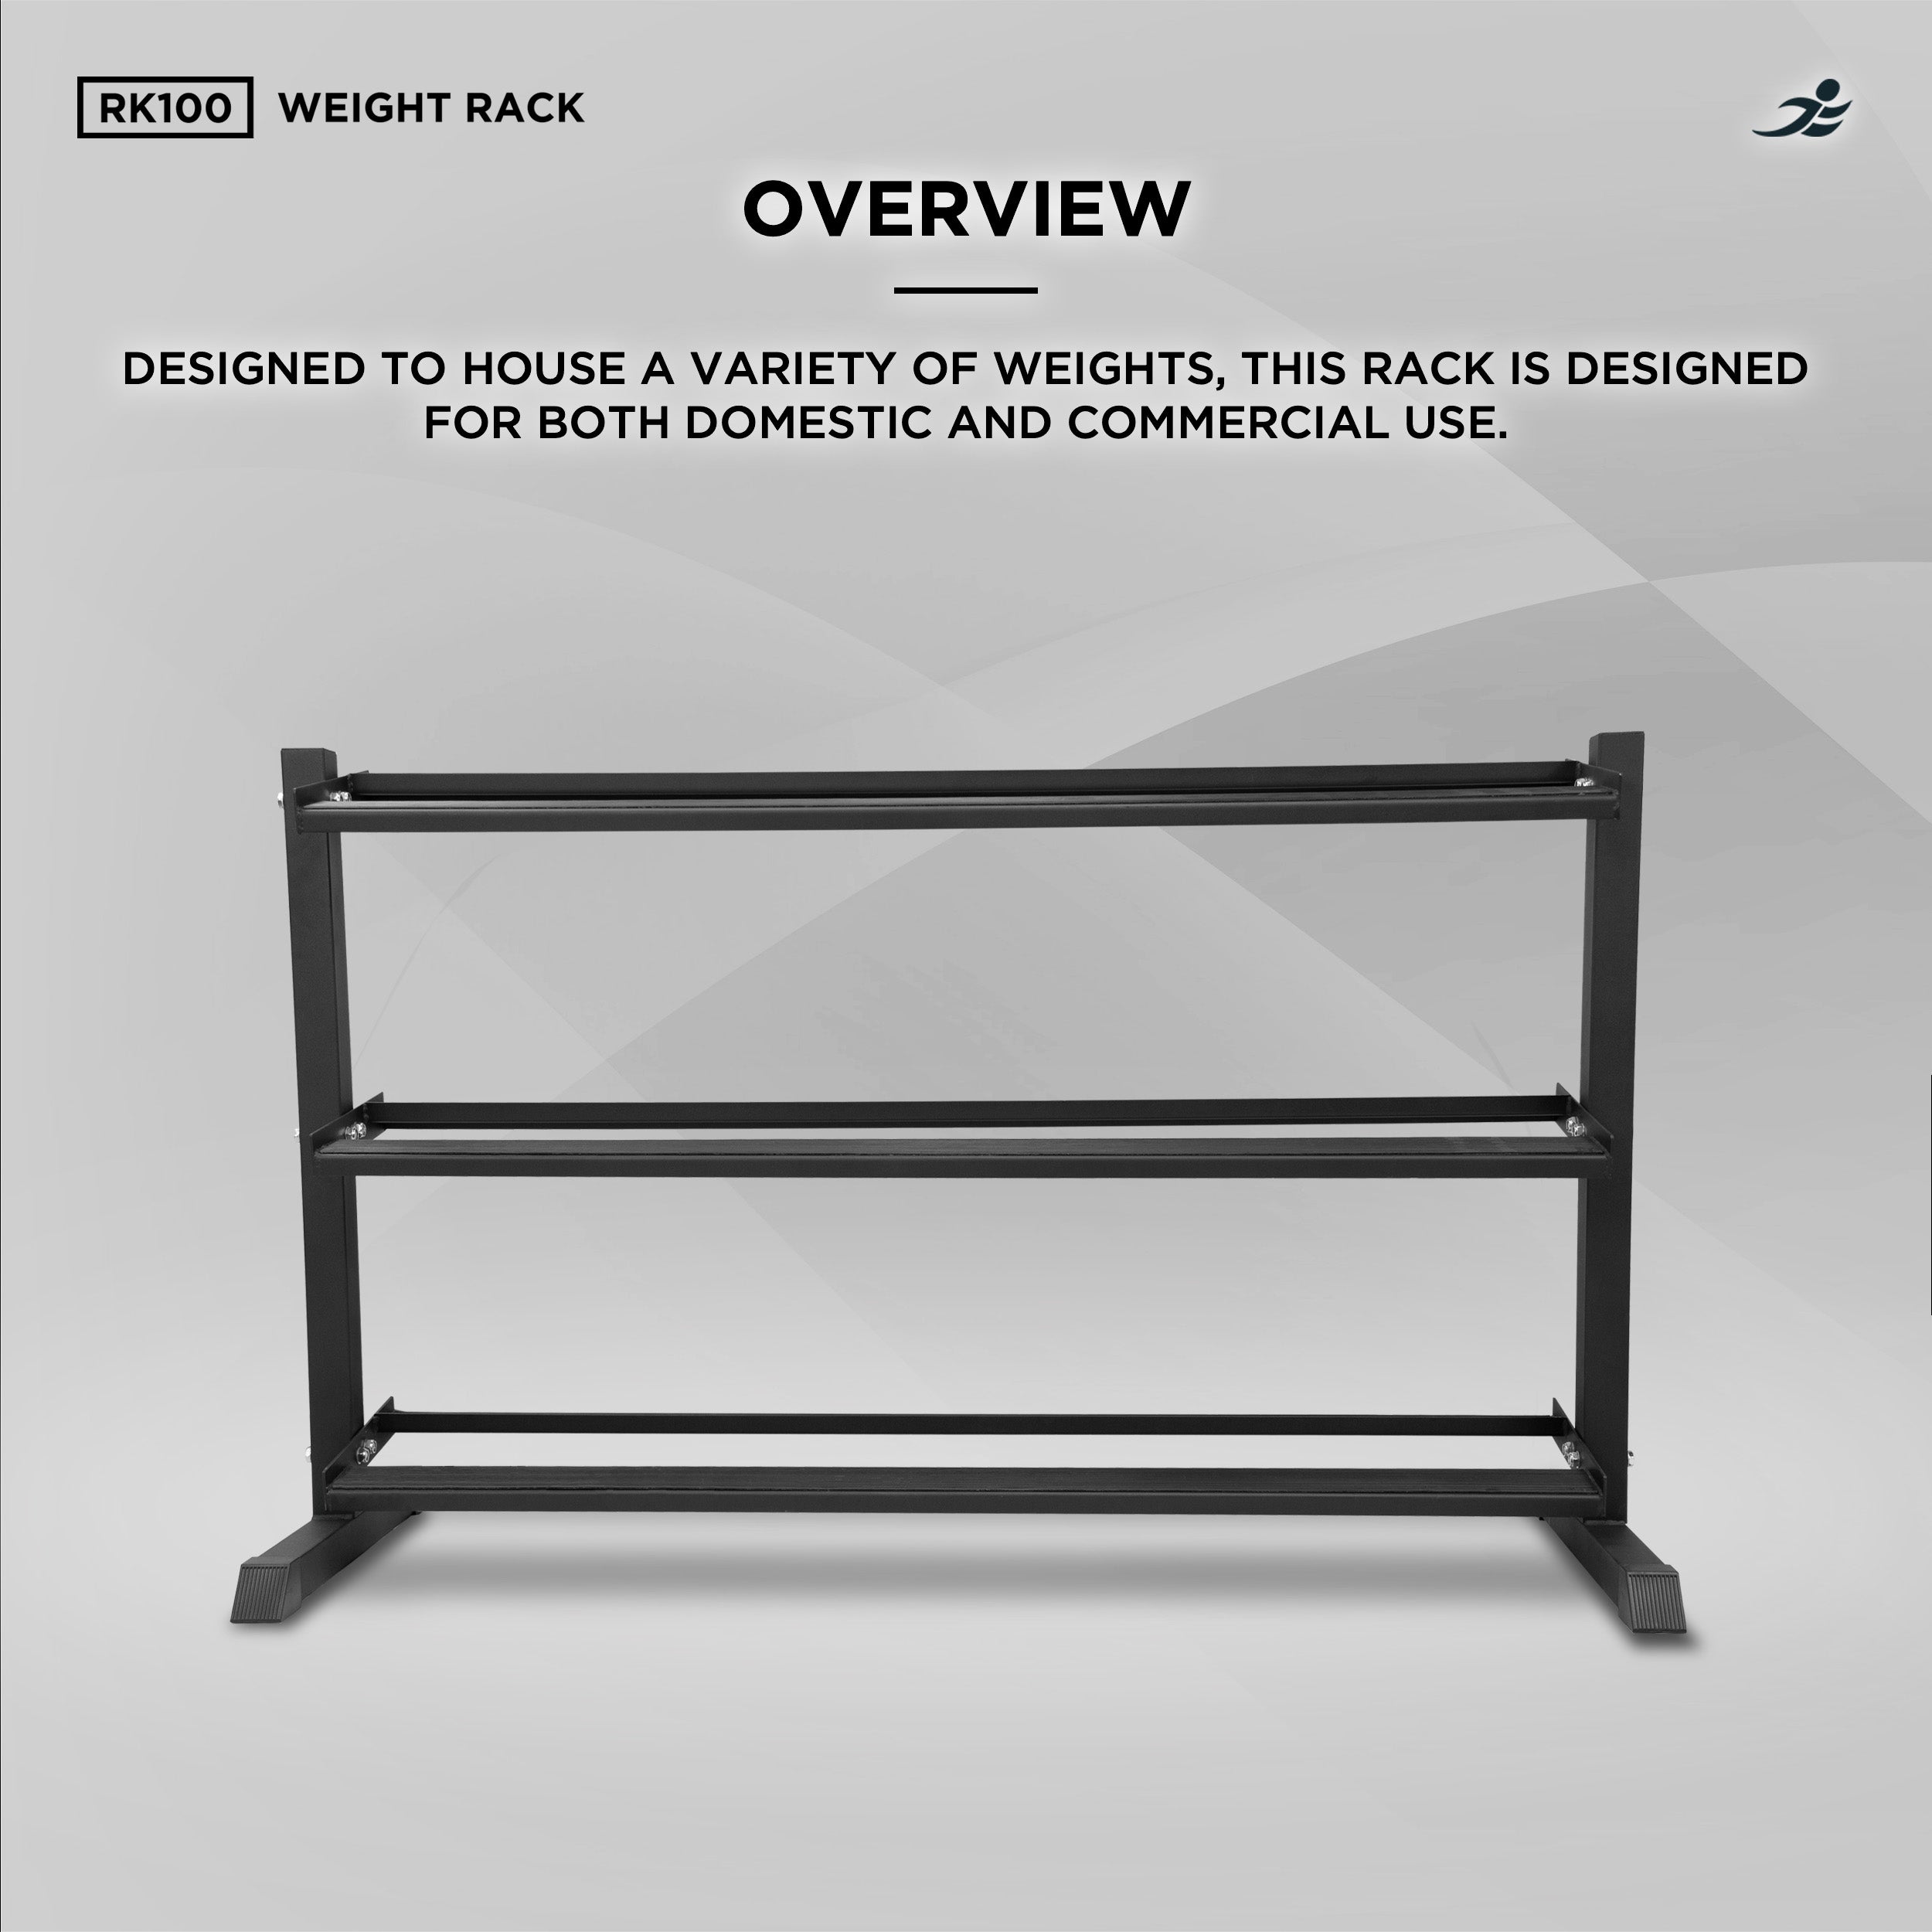 RK100-3 Tier Dumbbell Rack, Weight Stand